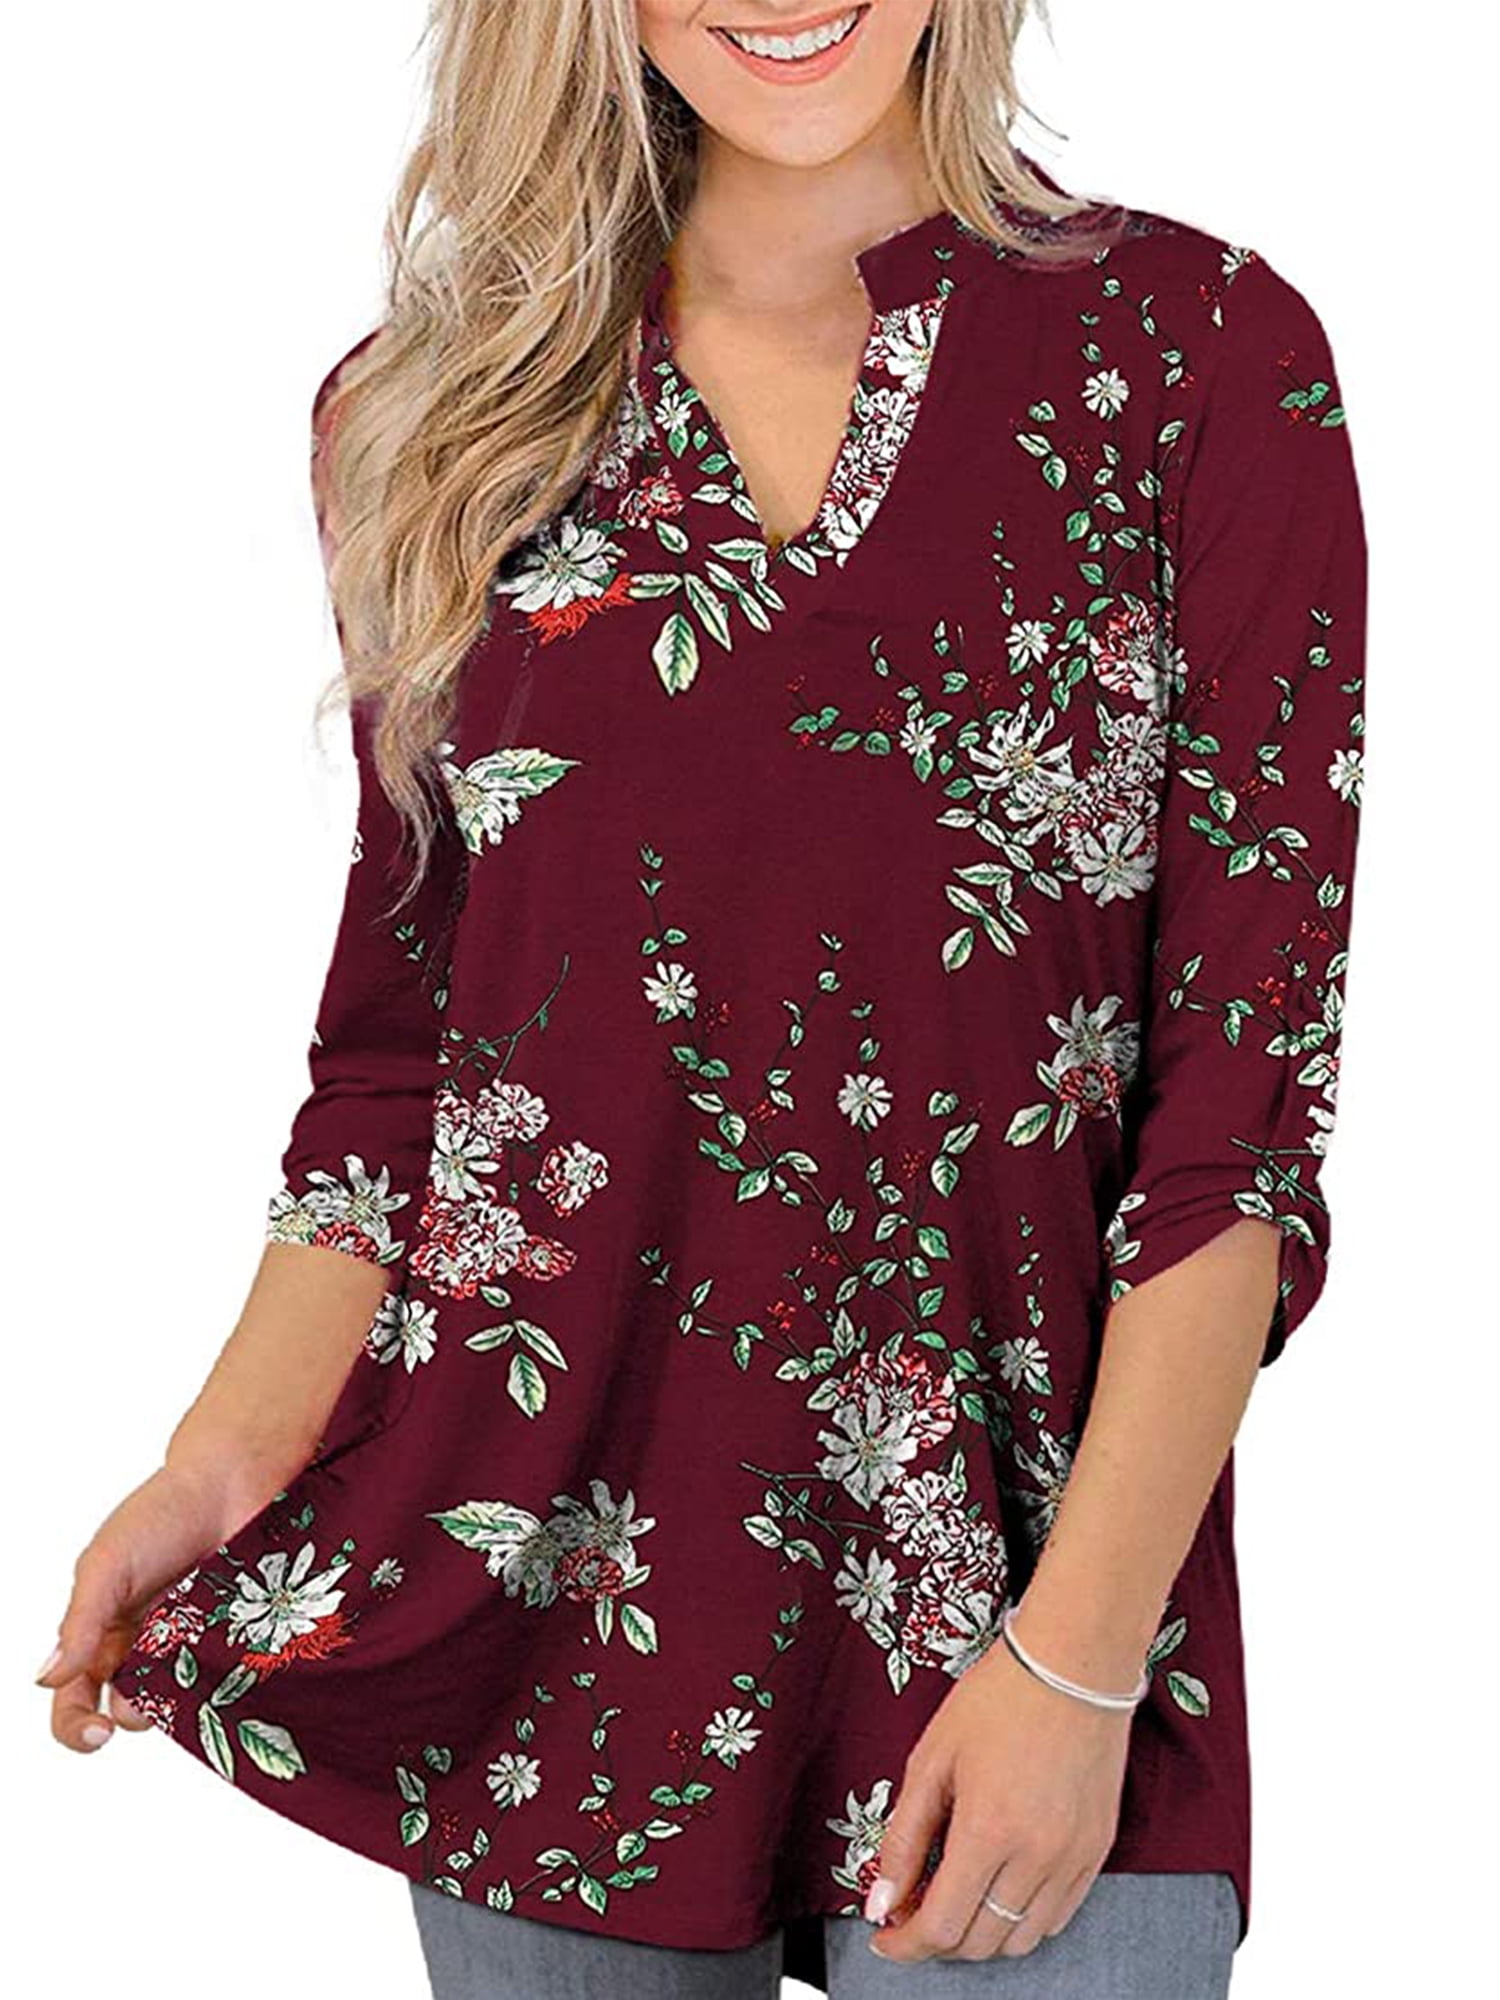 Chama Women's Plus Size 3/4 Roll Sleeves Tunic Tops Paisley Floral ...